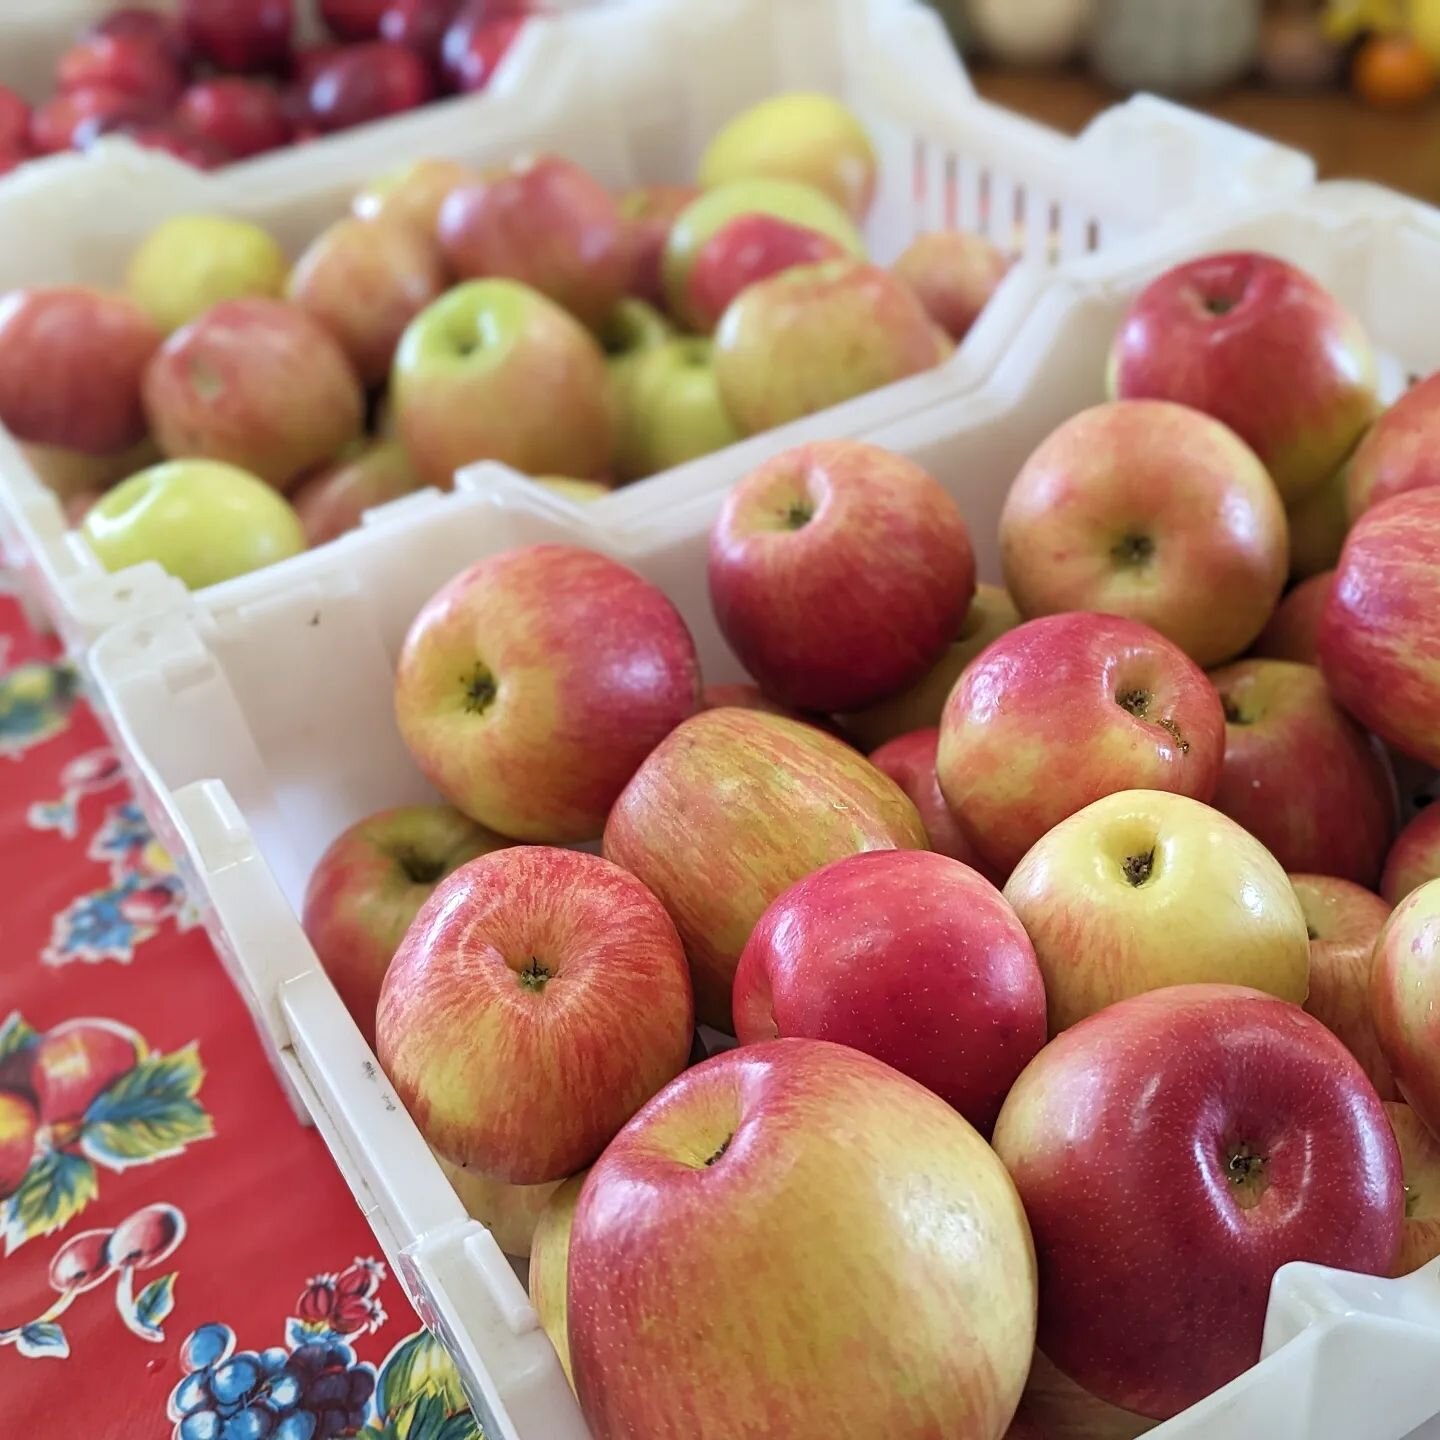 Did you know you can place an order for a large quantity of #1 apples and get a discount? Get 20 pounds or more for just $1.80/lb (excludes Honeycrisp and any varieties in short supply). Currently we have a lot of Gravensteins available for orders&md